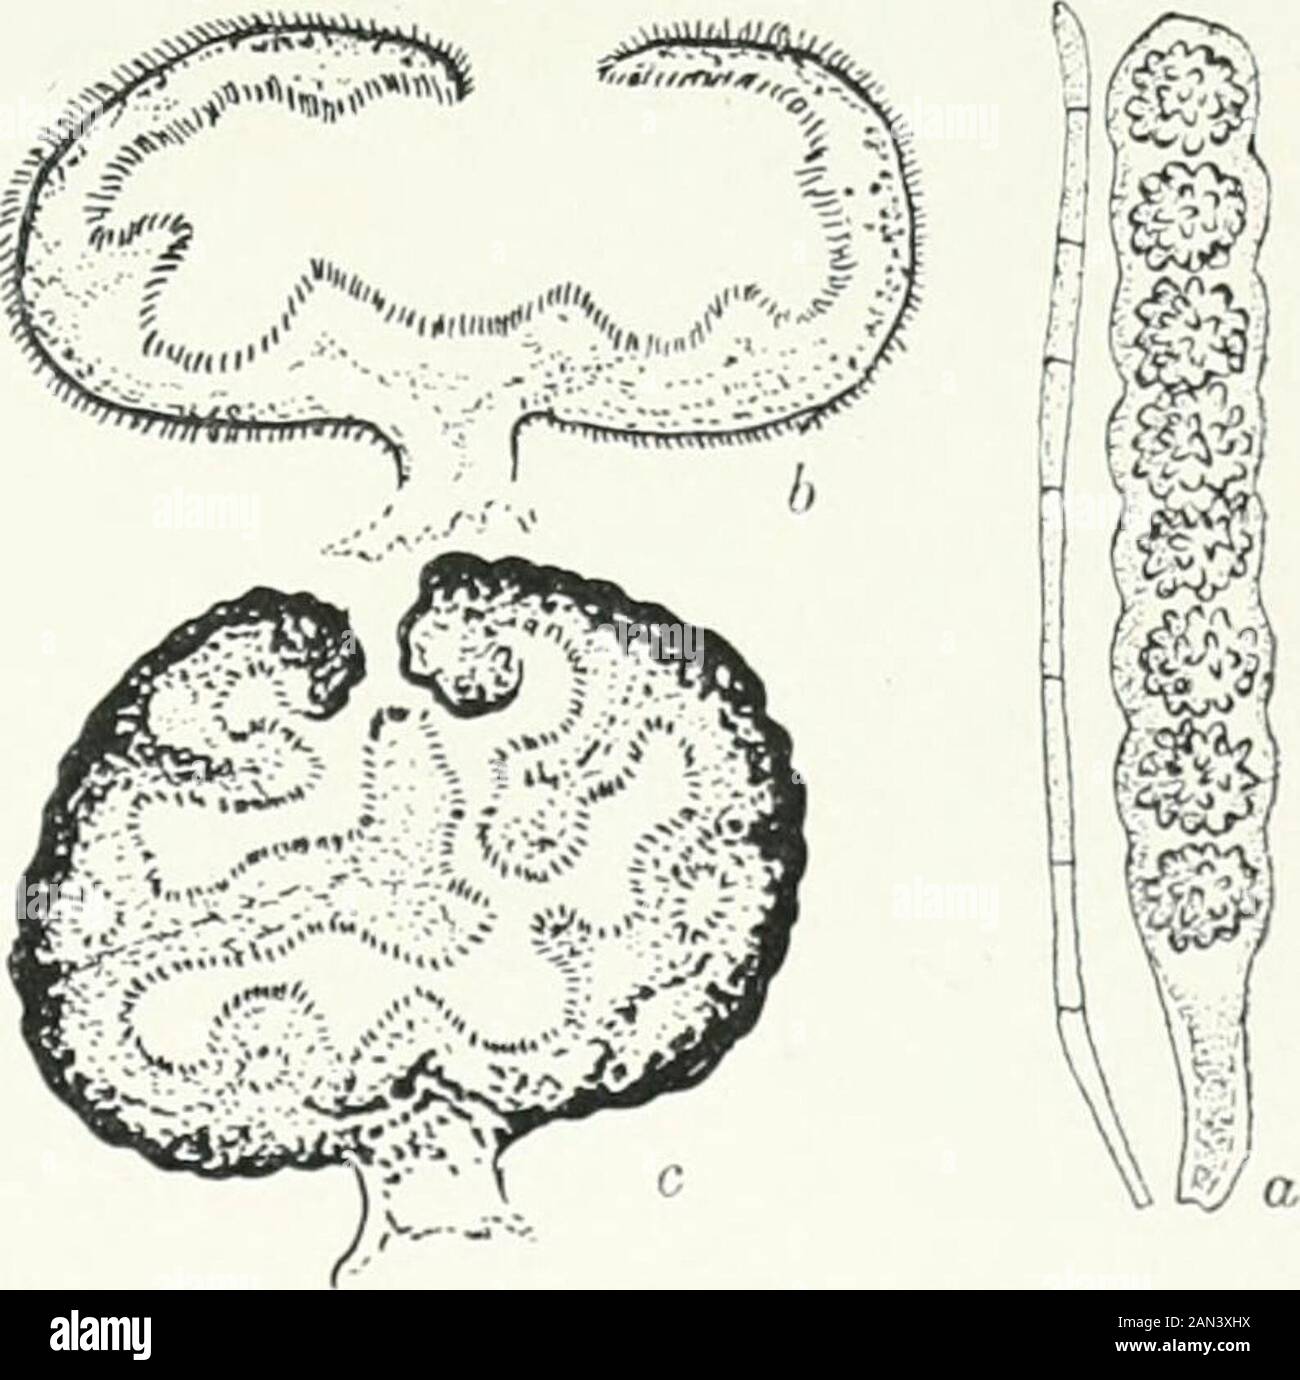 Fungi, Ascomycetes, Ustilaginales, Uredinales . rincipal modificationsbeing in the direction of adaptation to subterranean conditions by increasedprotection of the hymenium. This appears to have been achieved either byretaining the closed form of the young pezizaceous apothecium {Genea,Pachyphloeus) or by invagination of the fertile layer {Tuber) over a widelyexposed surface such as is found in R/iiziua or Sphaerosoma. In eithercase room has been made foradditional asci by throwing thehymenium into elaboratefolds.Massee, however, regards theglobose asci and dark-colouredsculptured spores of Tu Stock Photo